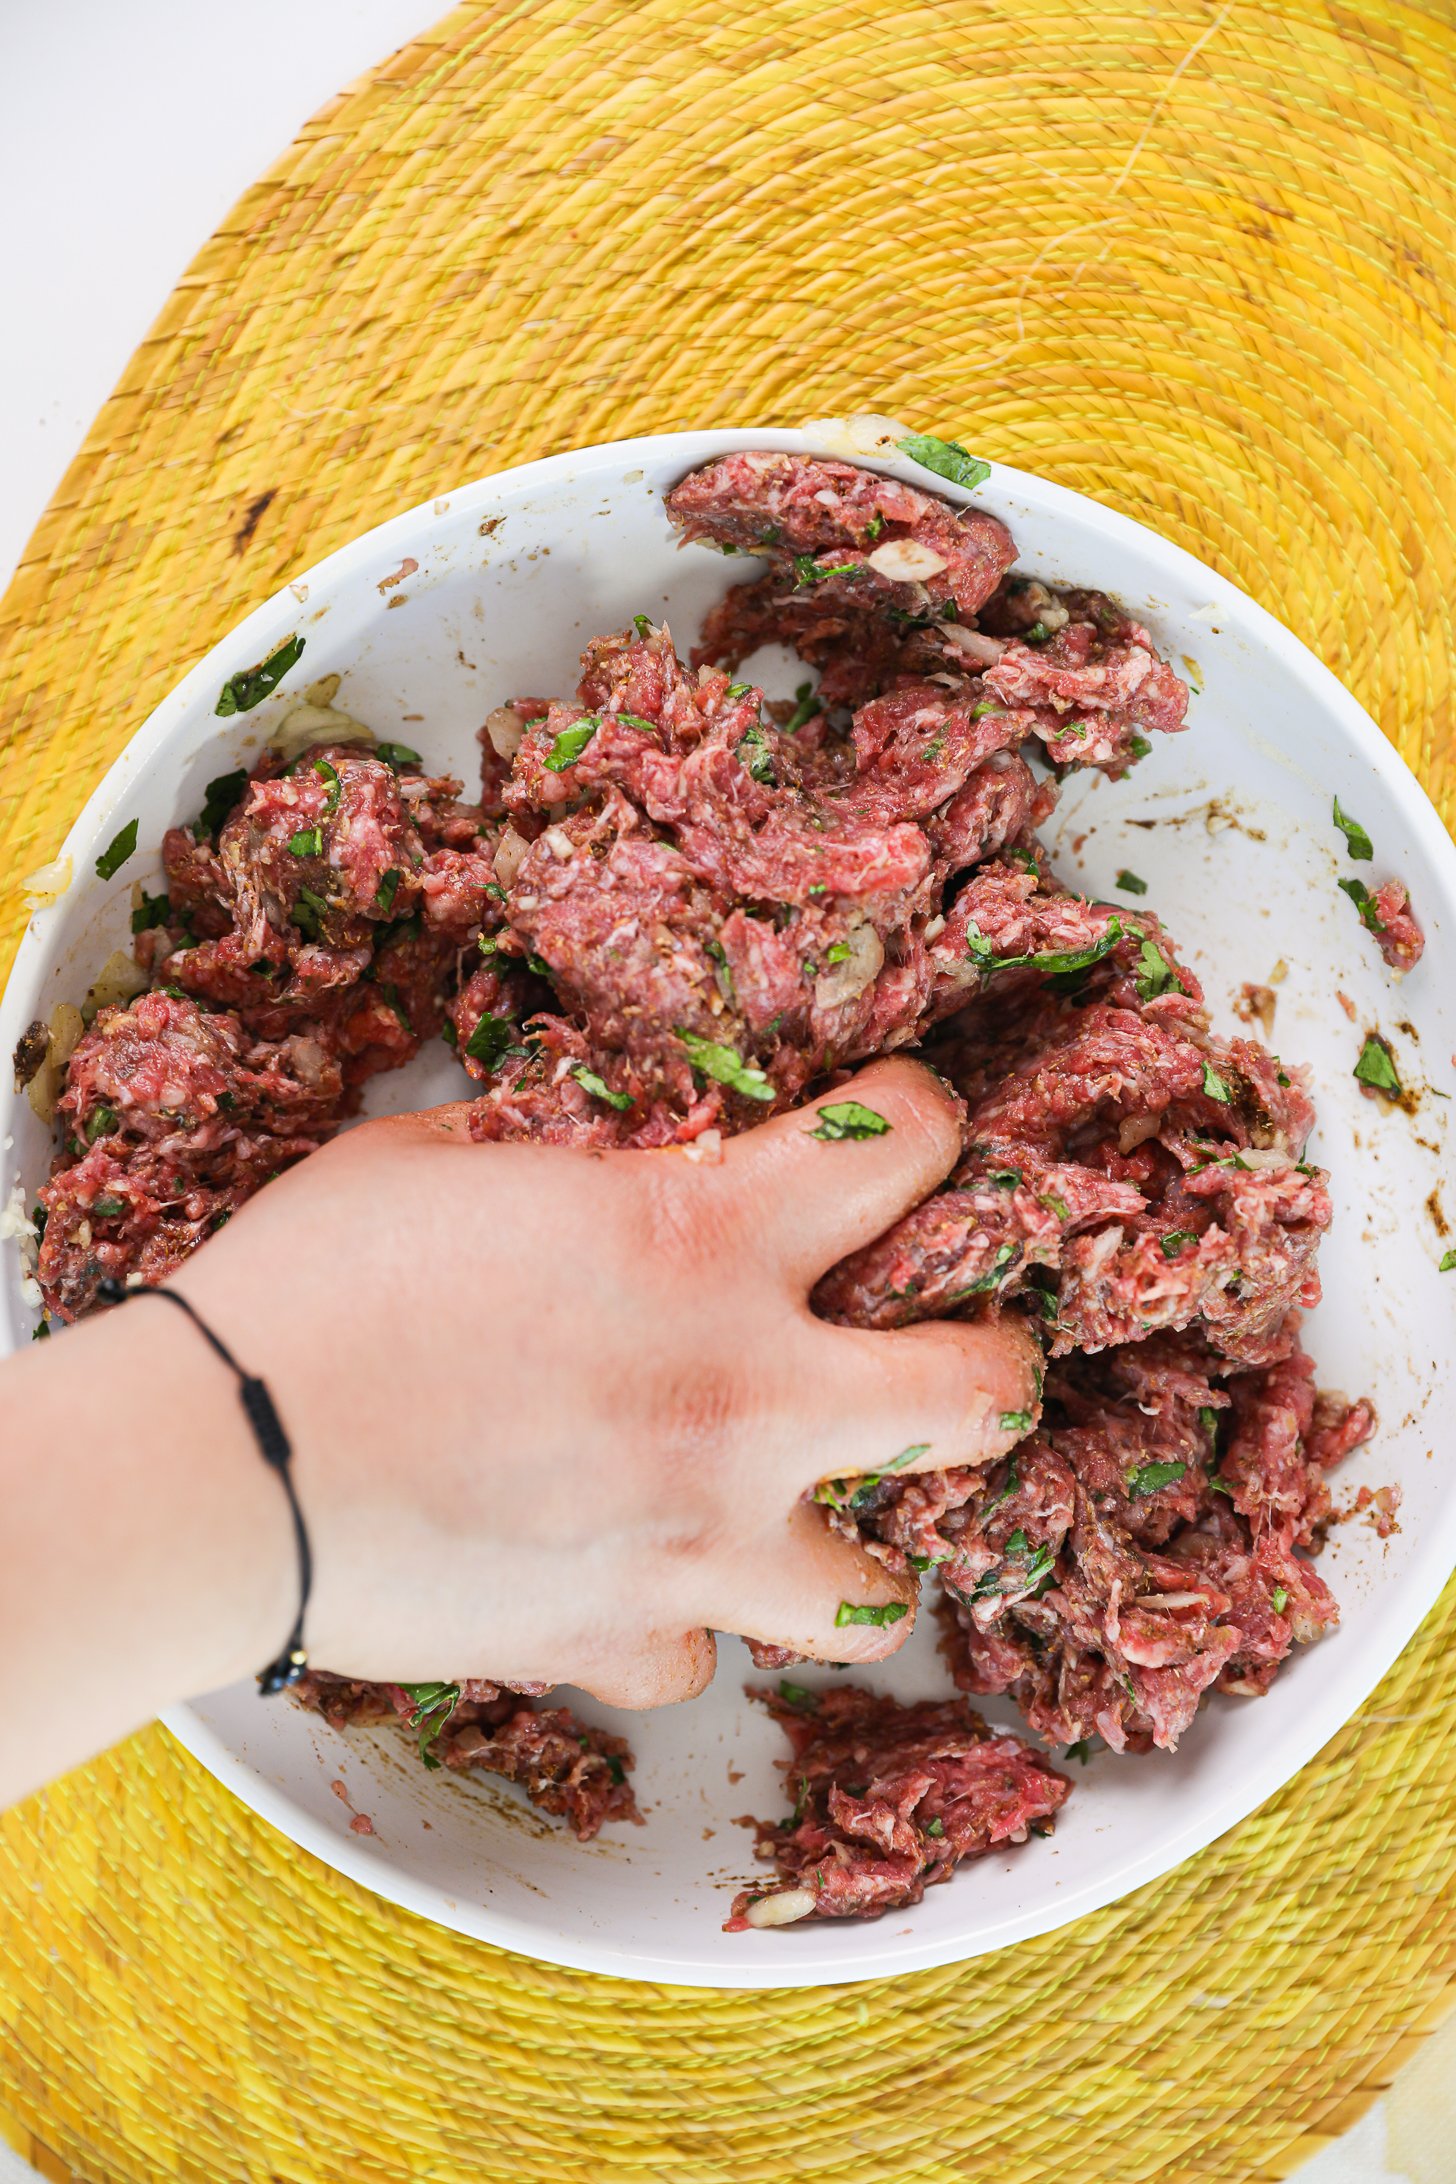 A hand squashing raw minced beef in a bowl.